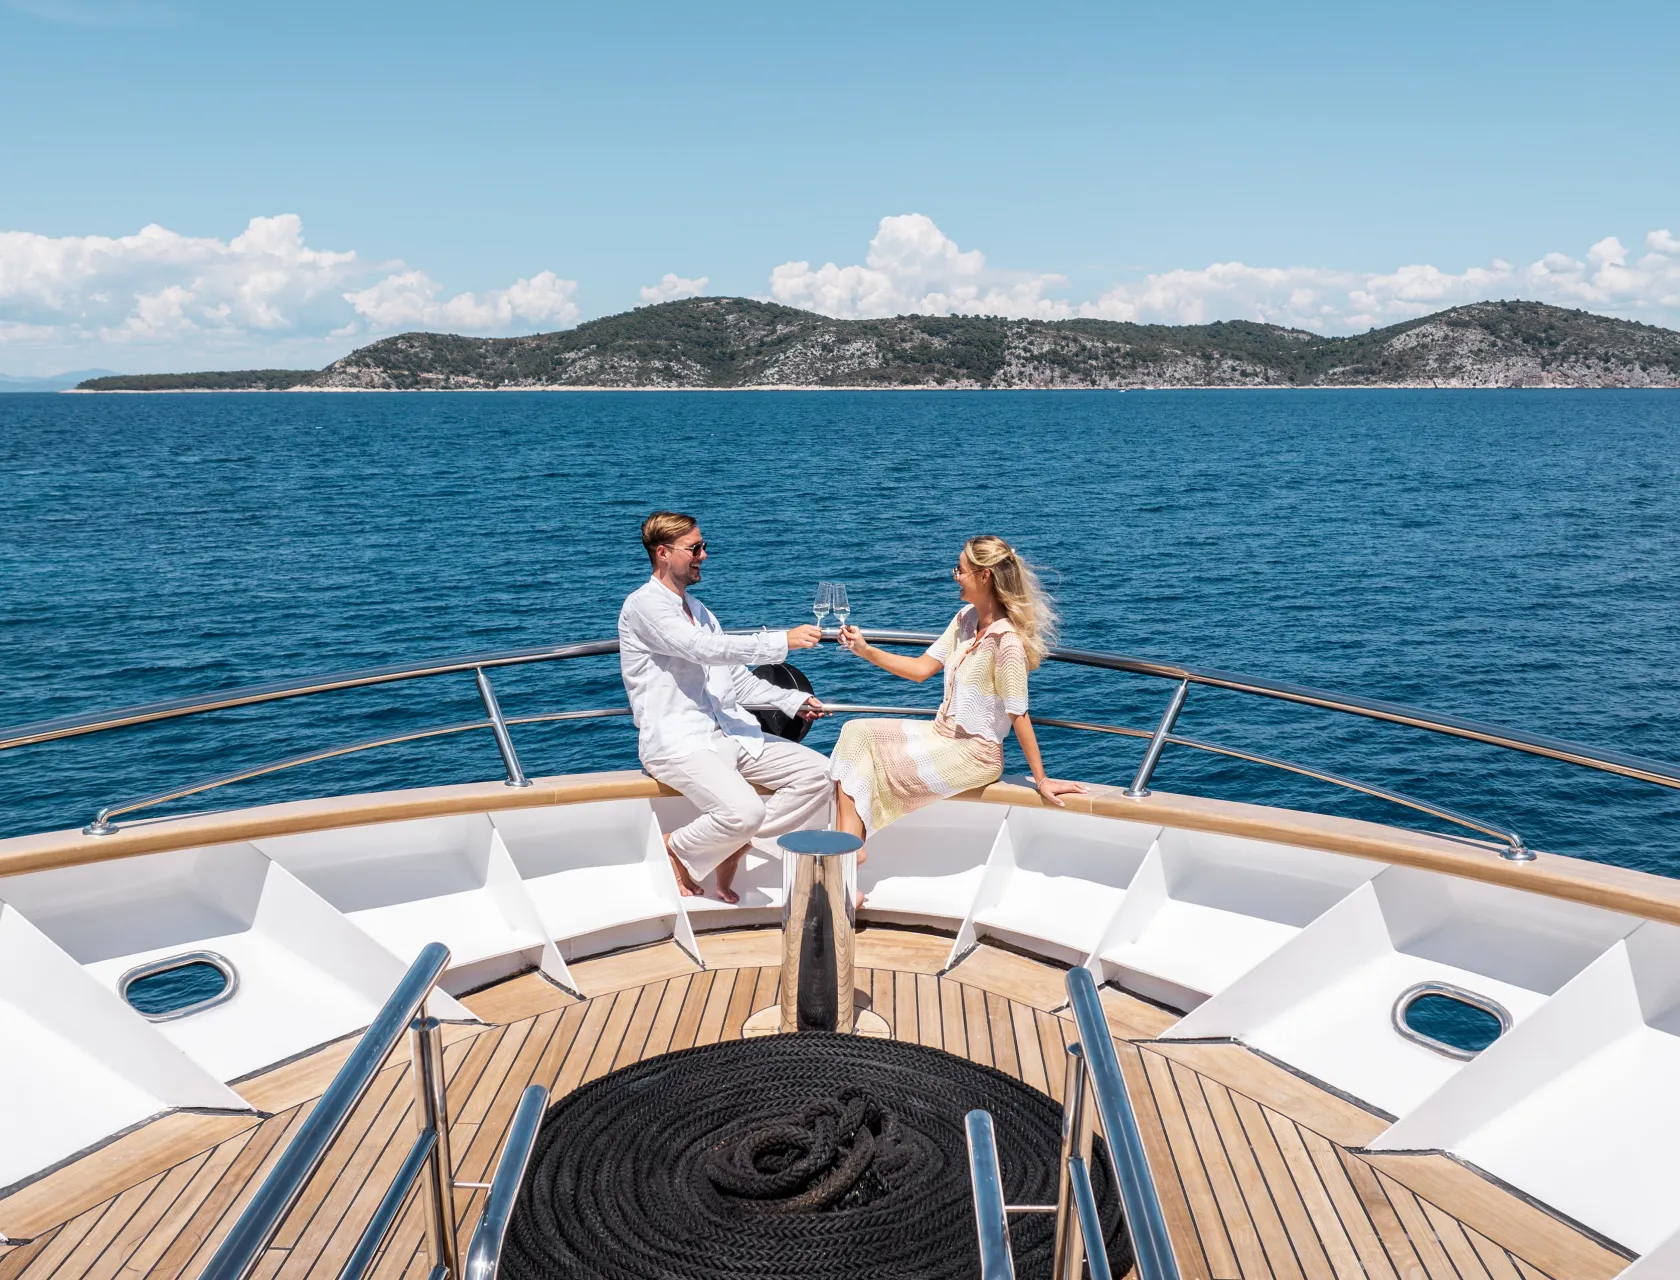 Goolets’ Pre-season Planning for DS Yacht Charters in Croatia